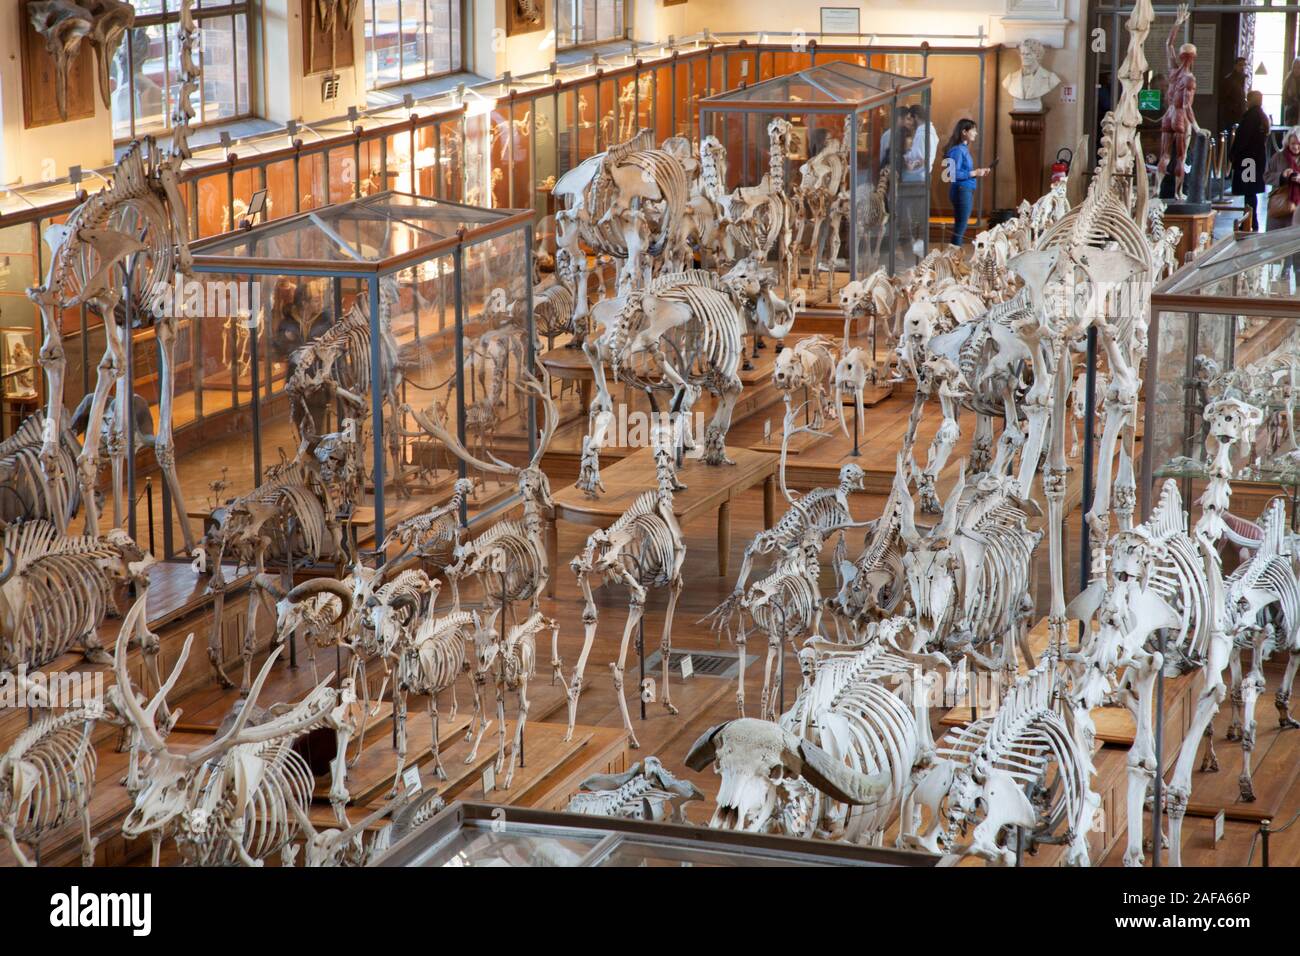 The Gallery of Paleontology and Comparative Anatomy in Paris features an amazing collection of skeletons, fossils, and historic biological specimens Stock Photo